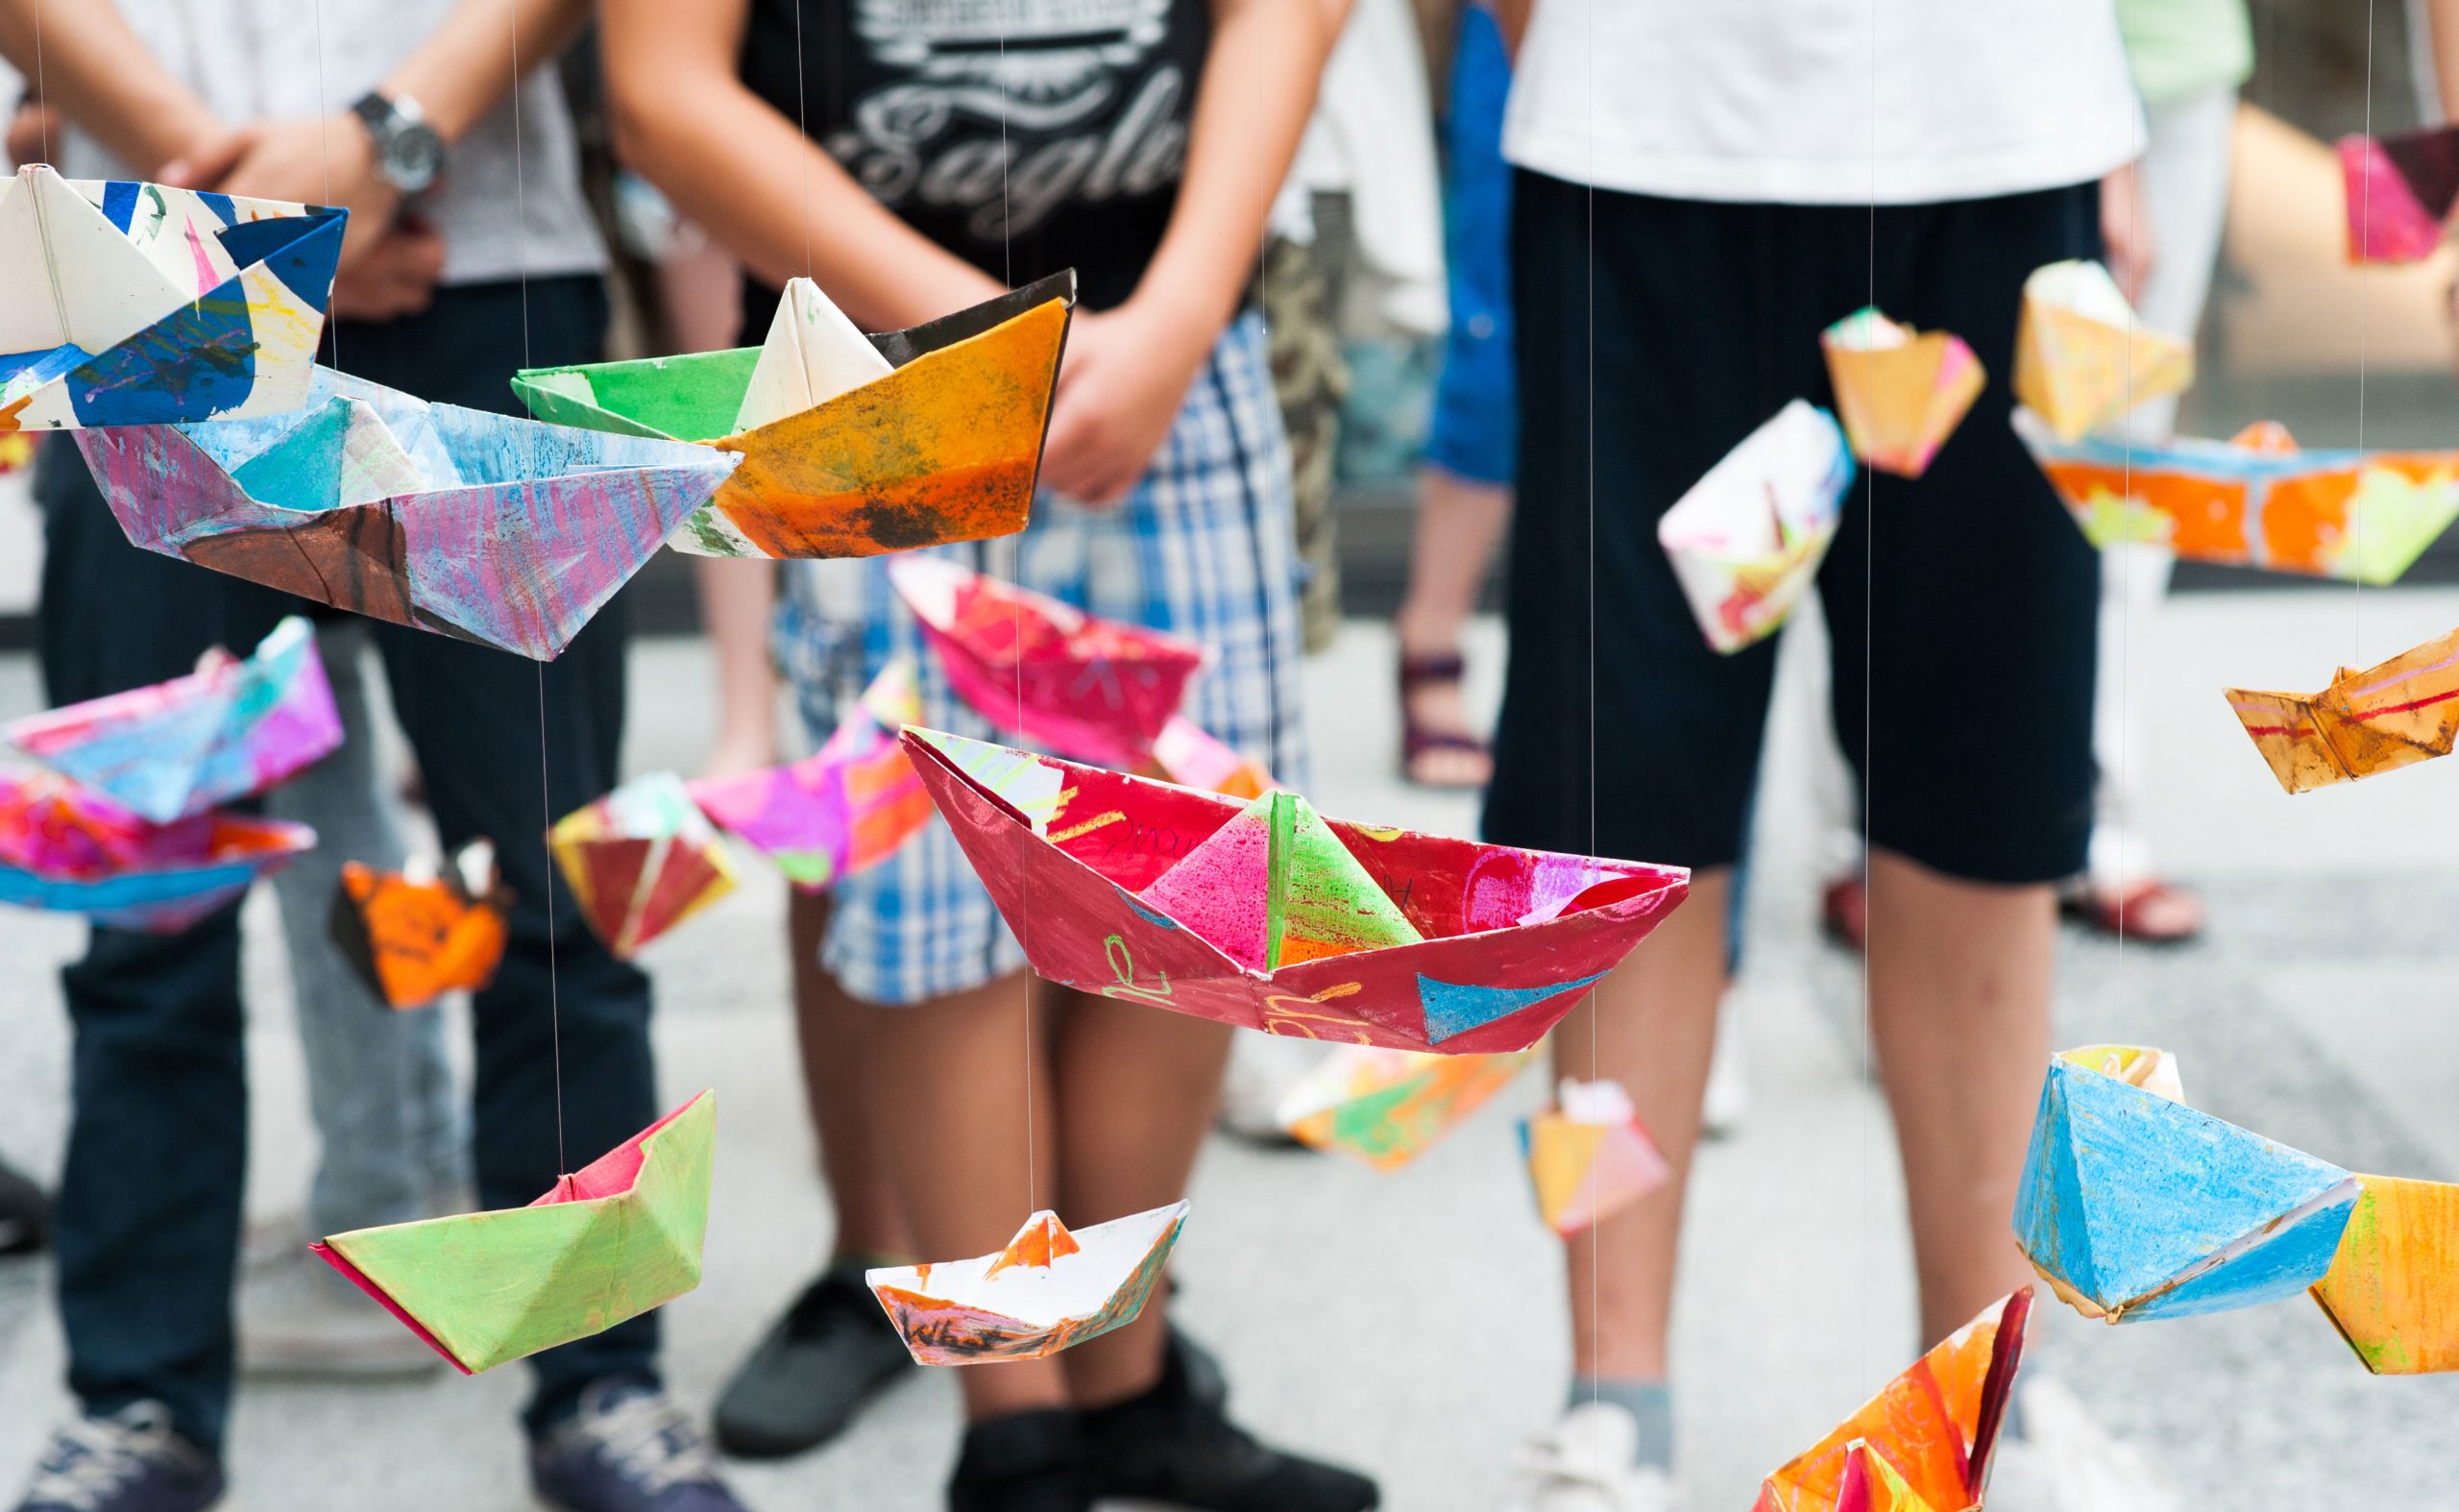 Children look at their colourful paper boats hanging on threads.